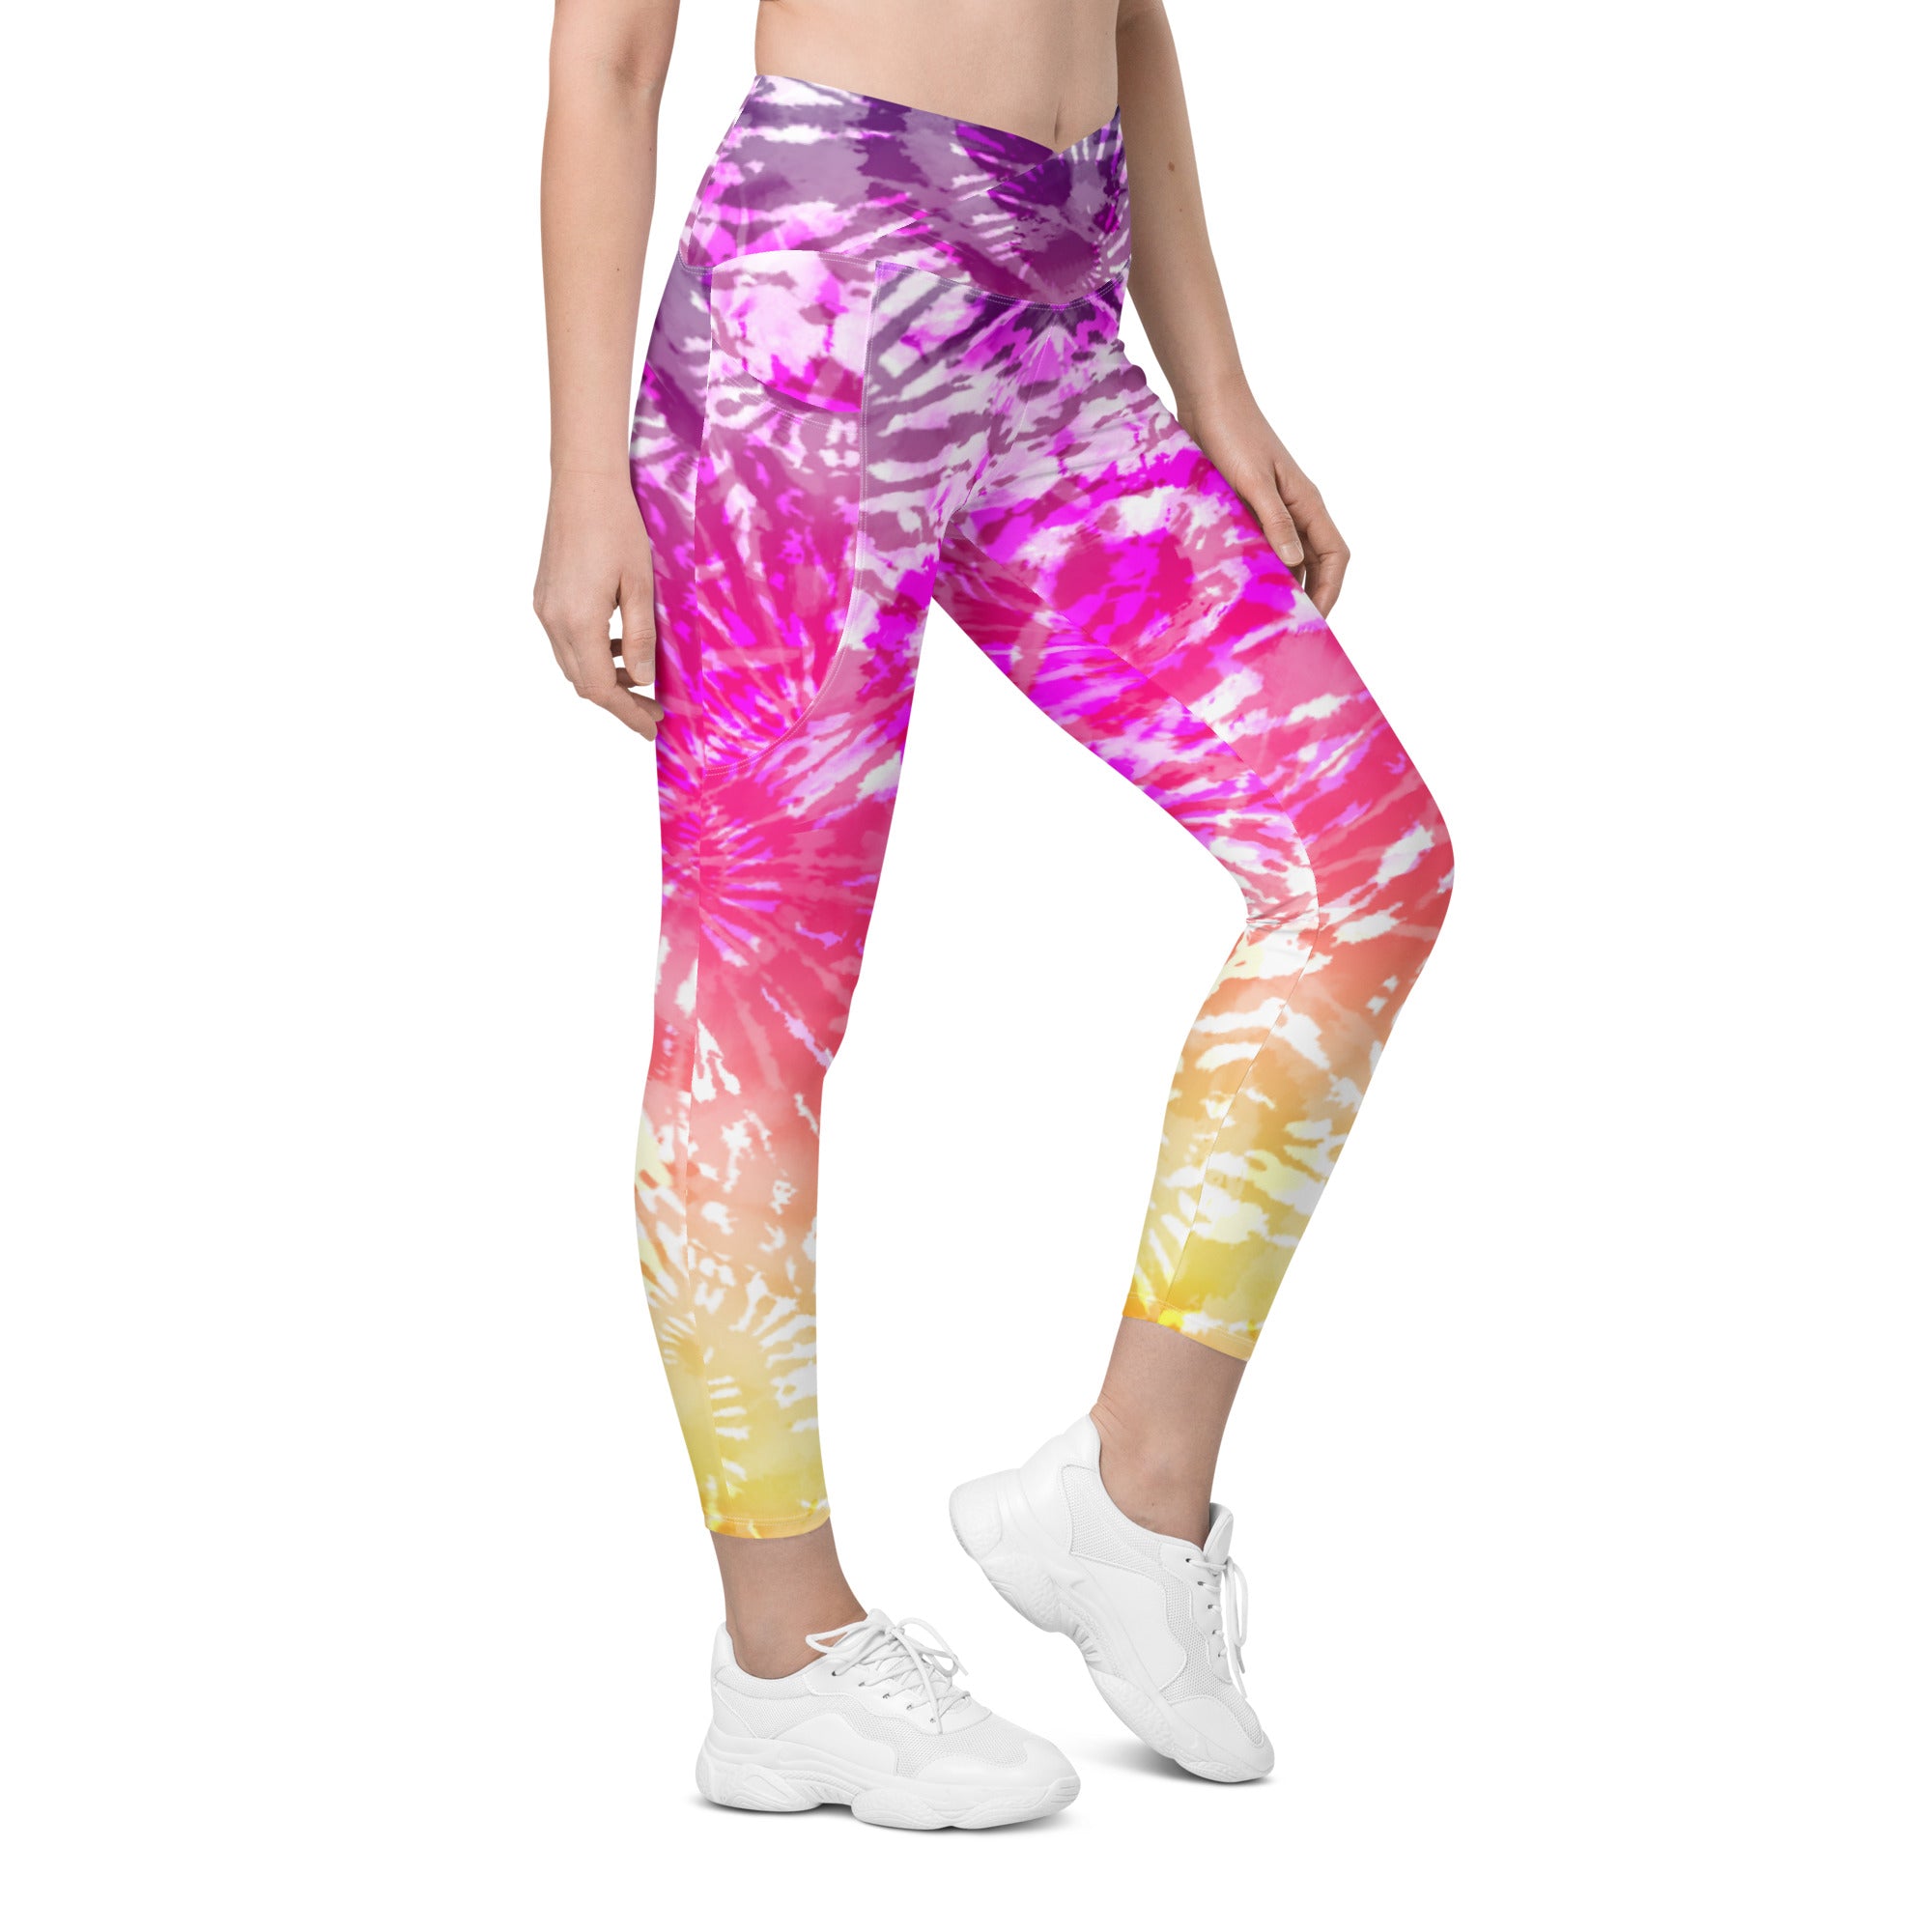 Crossover leggings with pockets- TIE DYE SPIRALS